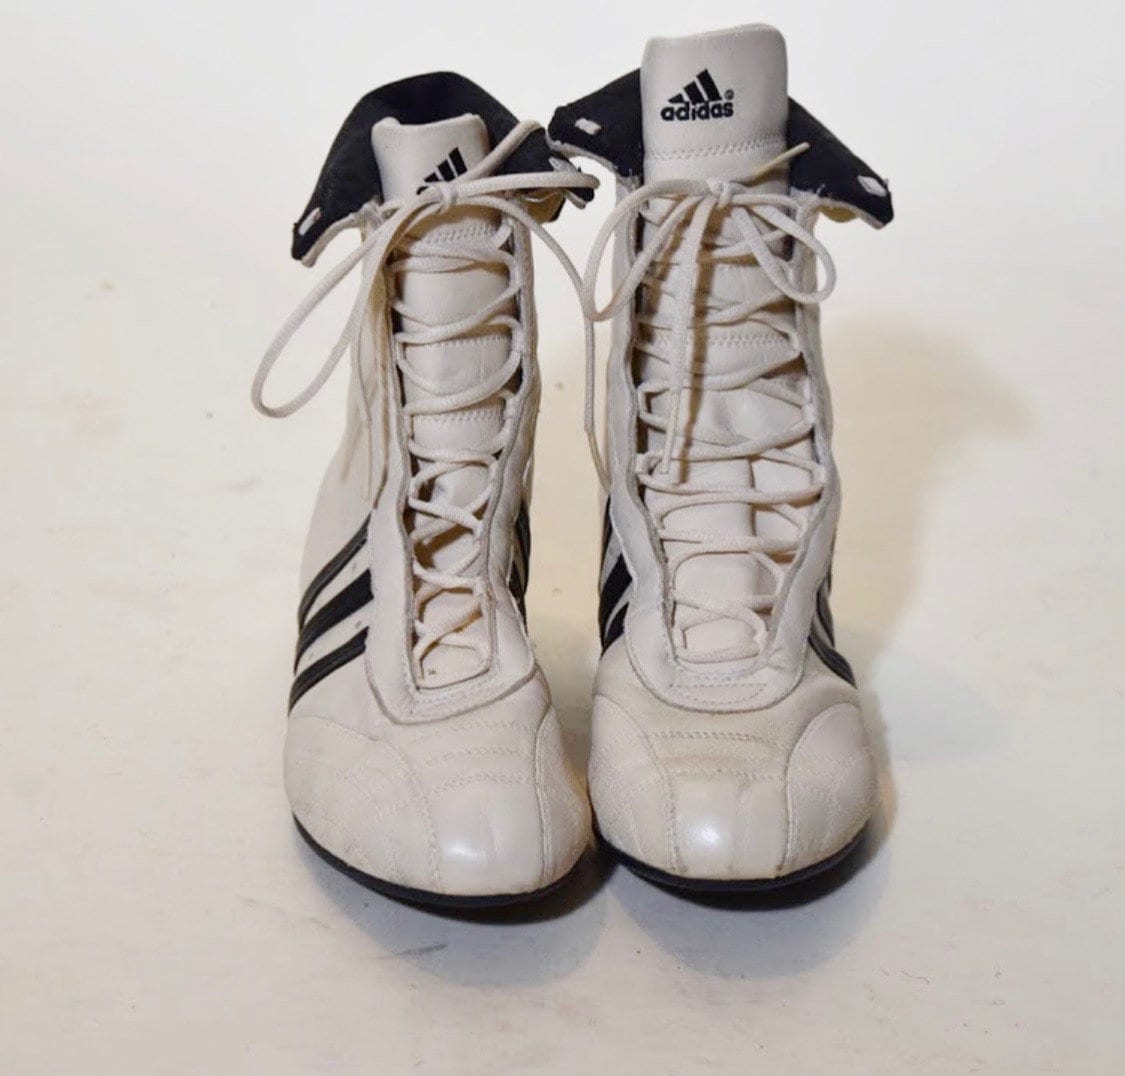 Vintage Adidas High top lace up front wrestling style athletic tennis shoes  women's US size 8